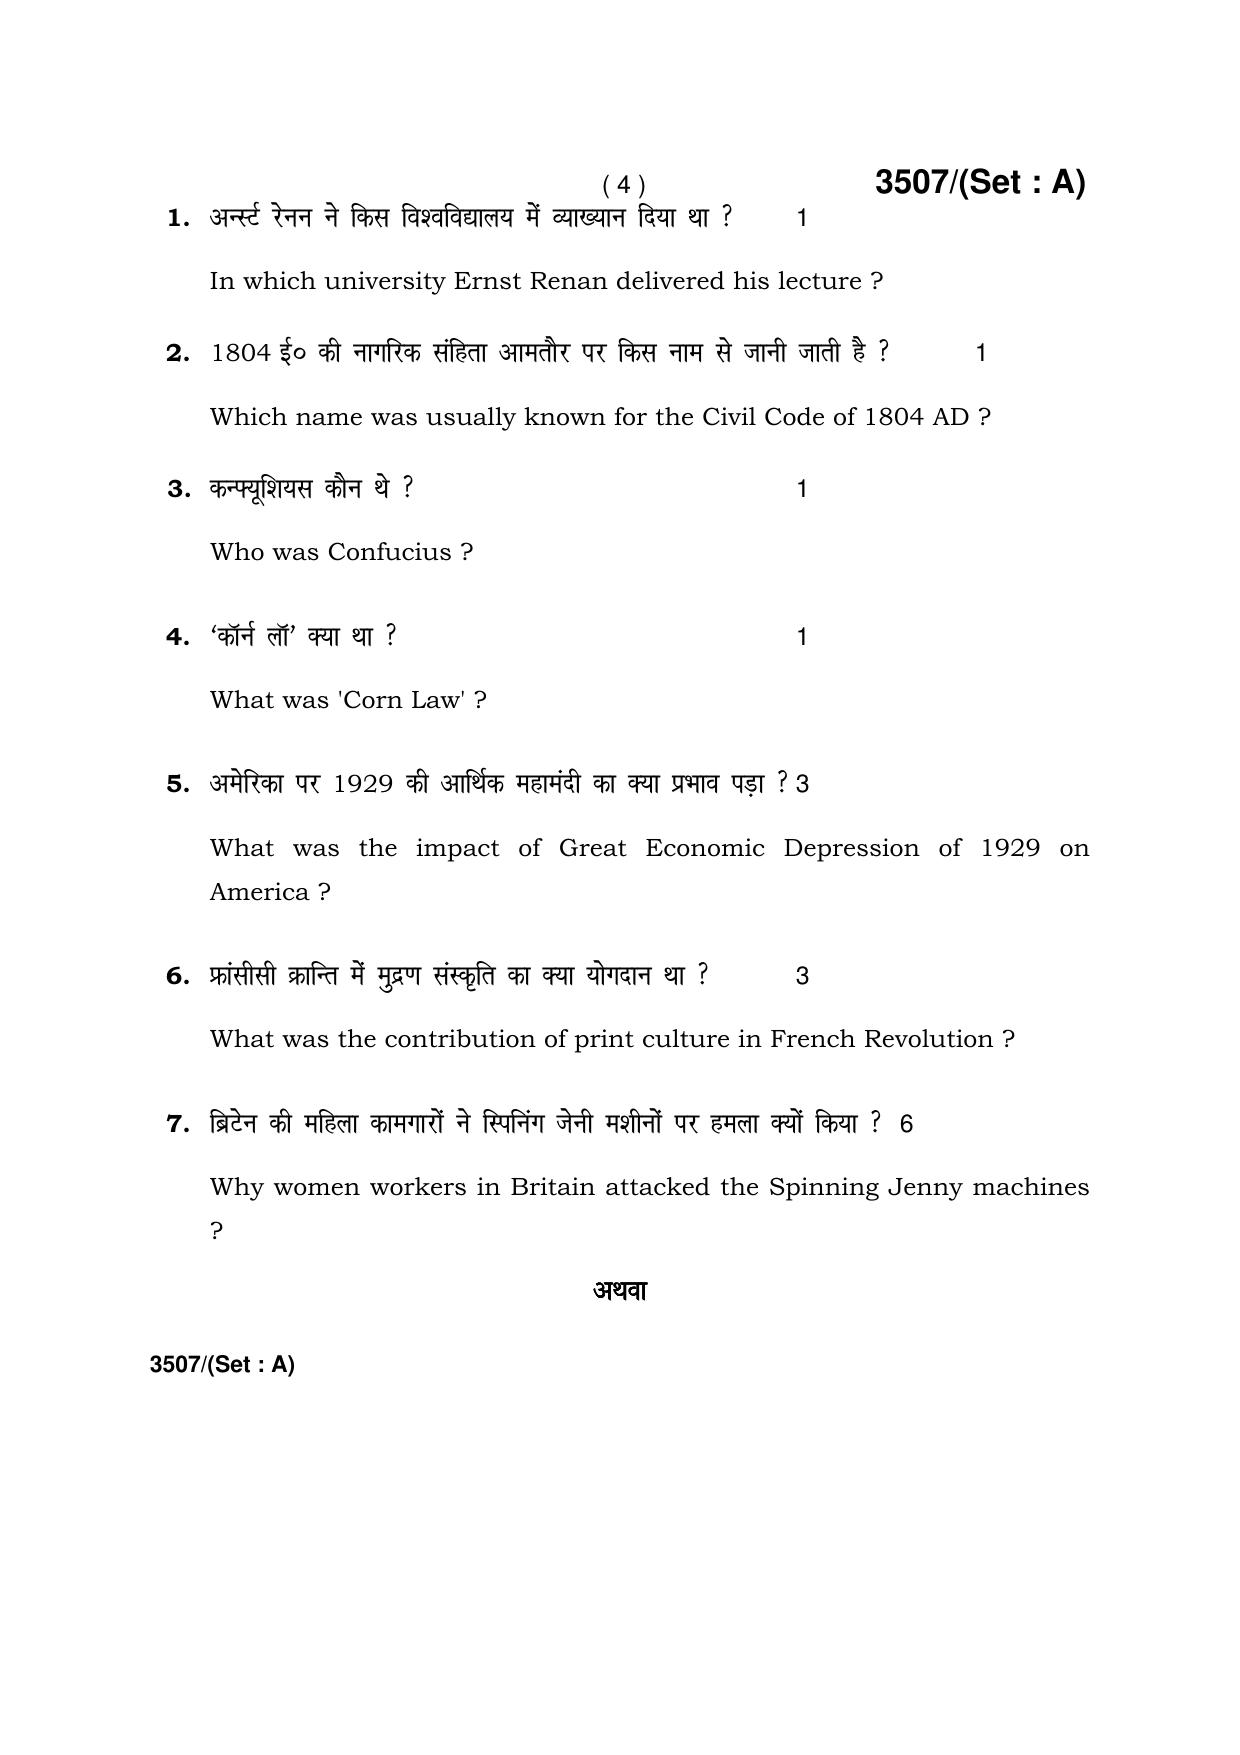 Haryana Board HBSE Class 10 Social Science -A 2018 Question Paper - Page 4